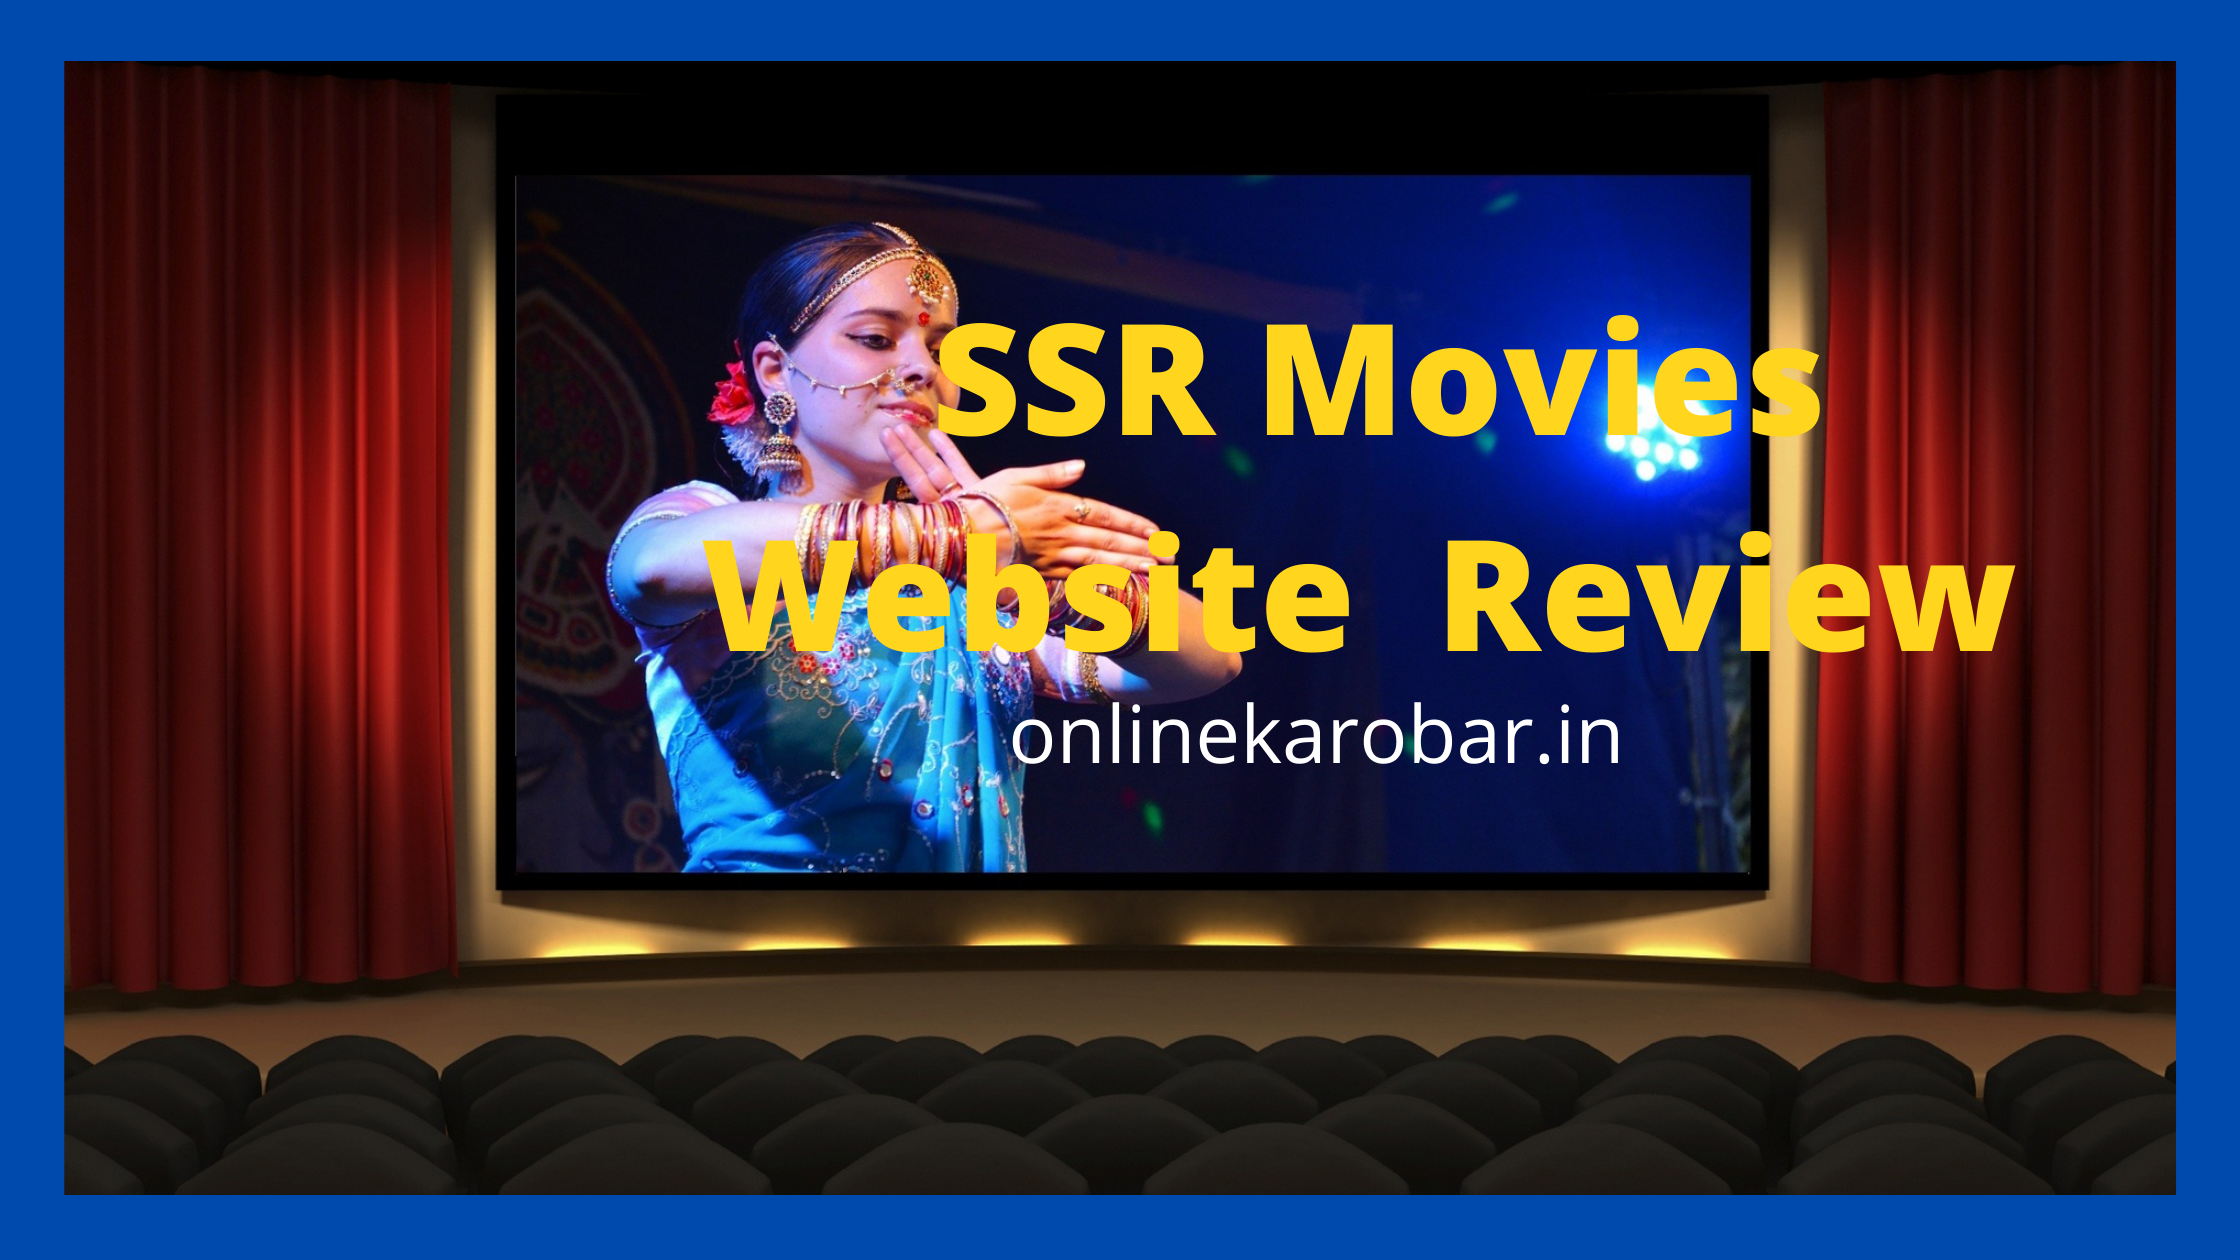 ssr movies website review